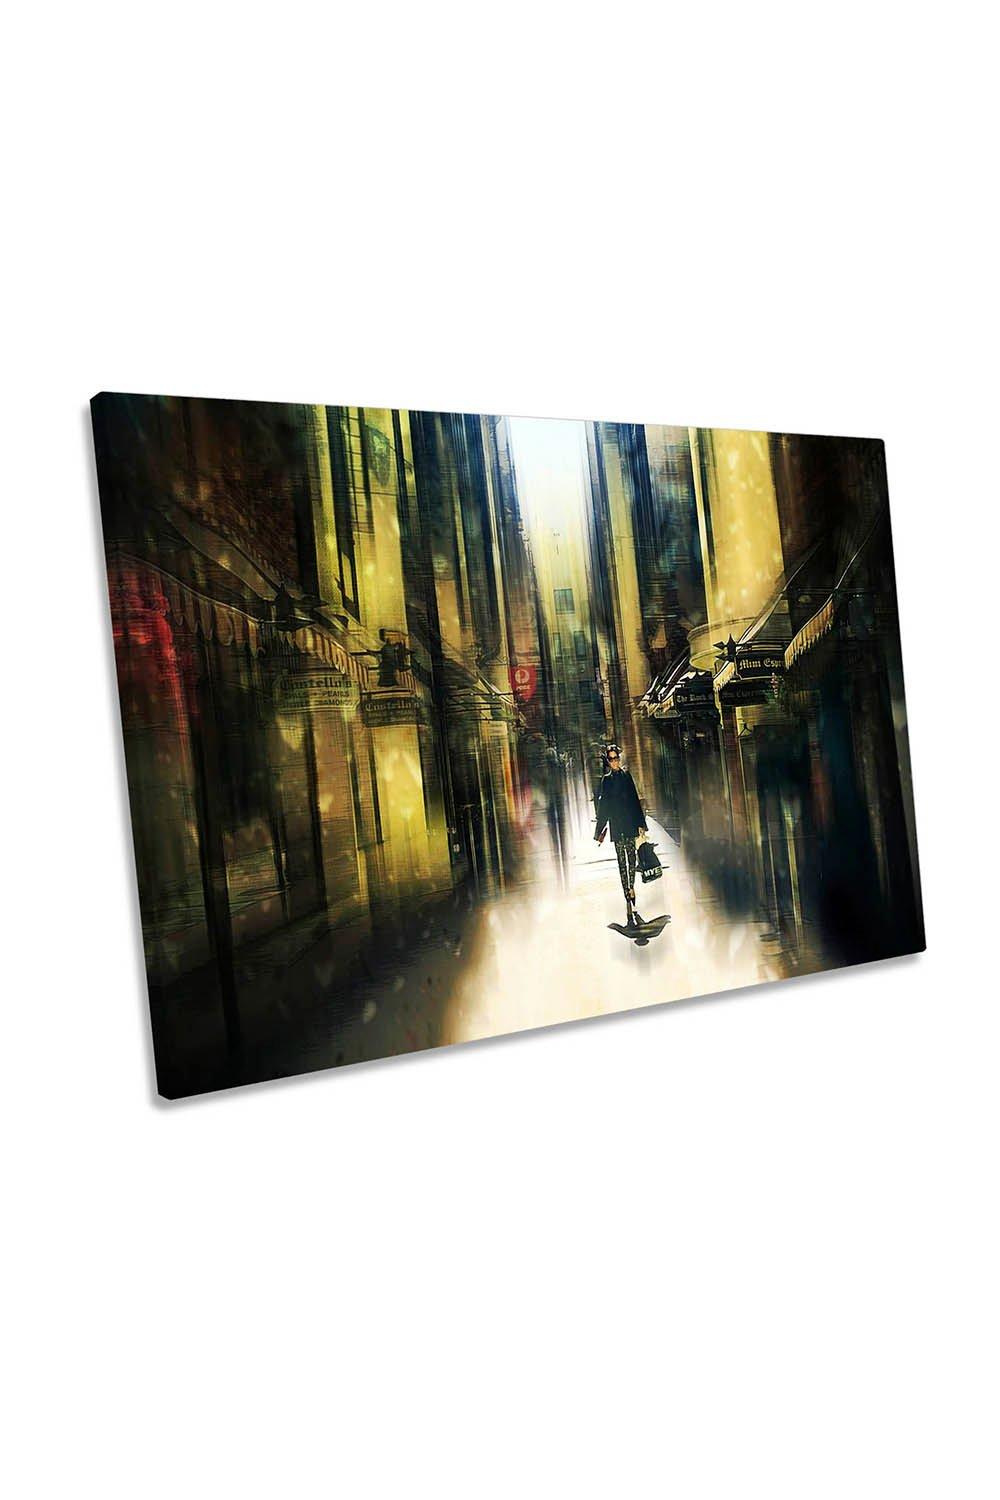 The Me-trix Shopping Streets Fashion Canvas Wall Art Picture Print